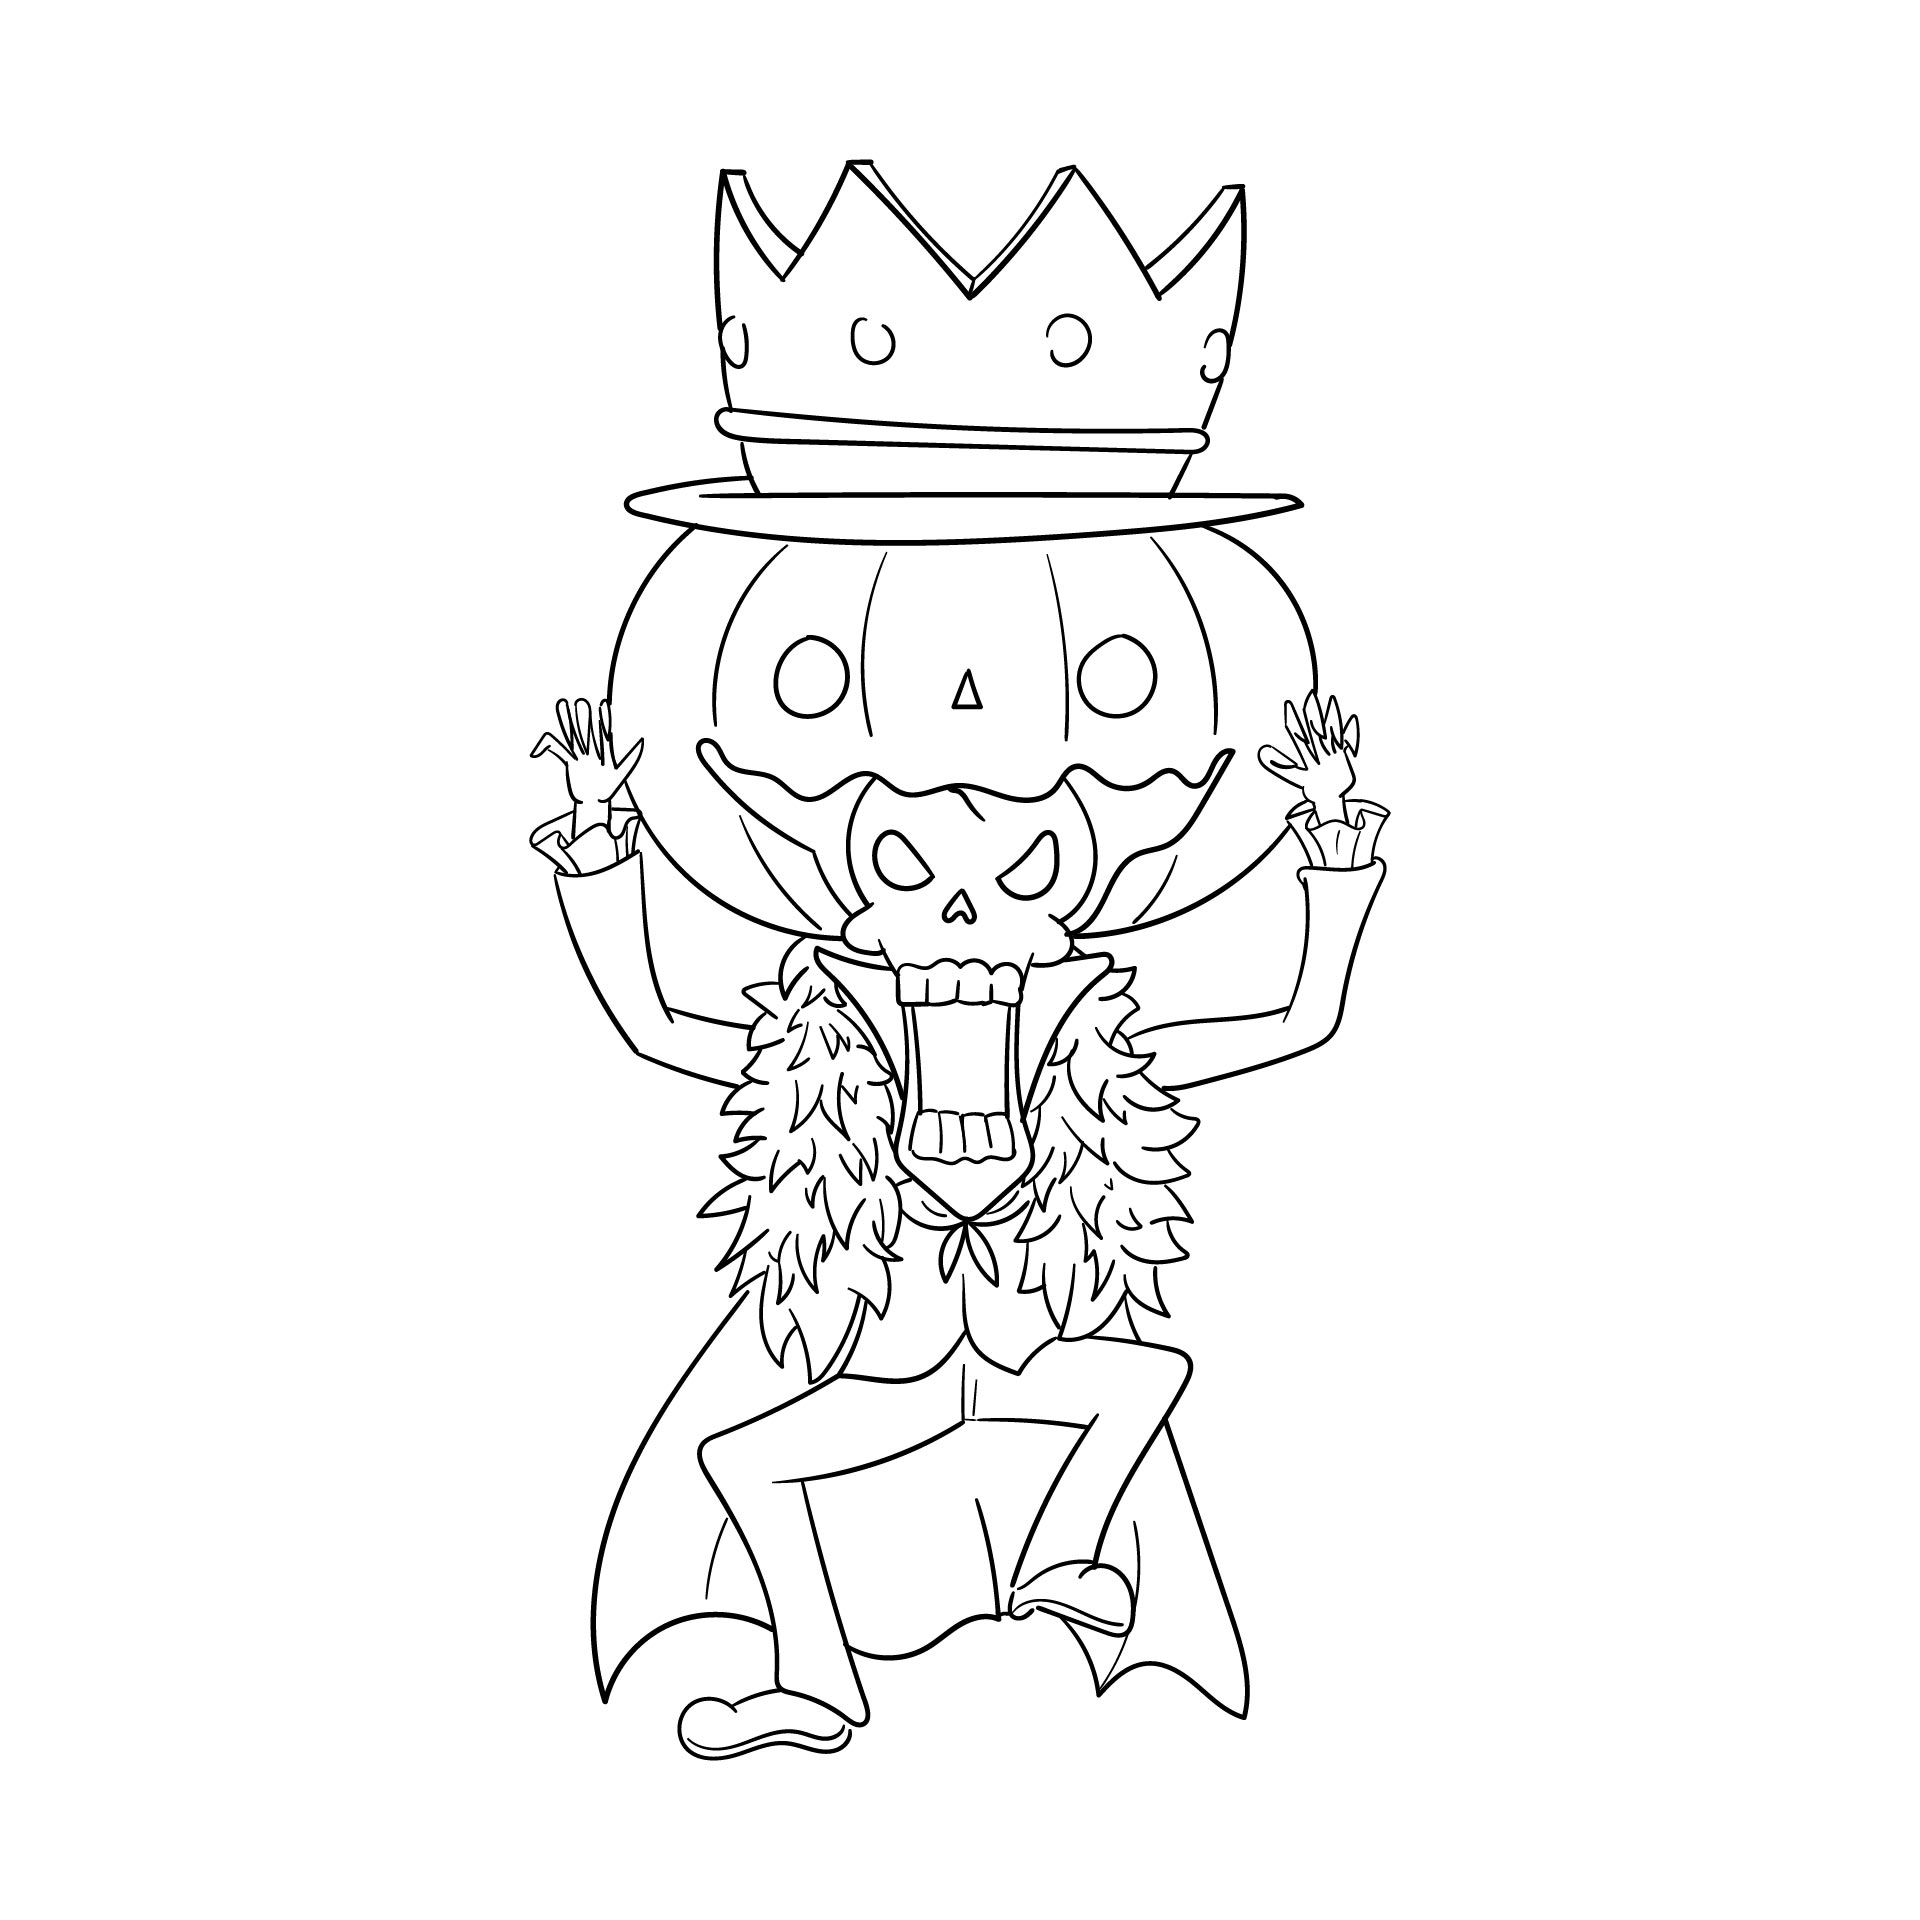 Fun Free Printable Halloween Coloring Pages